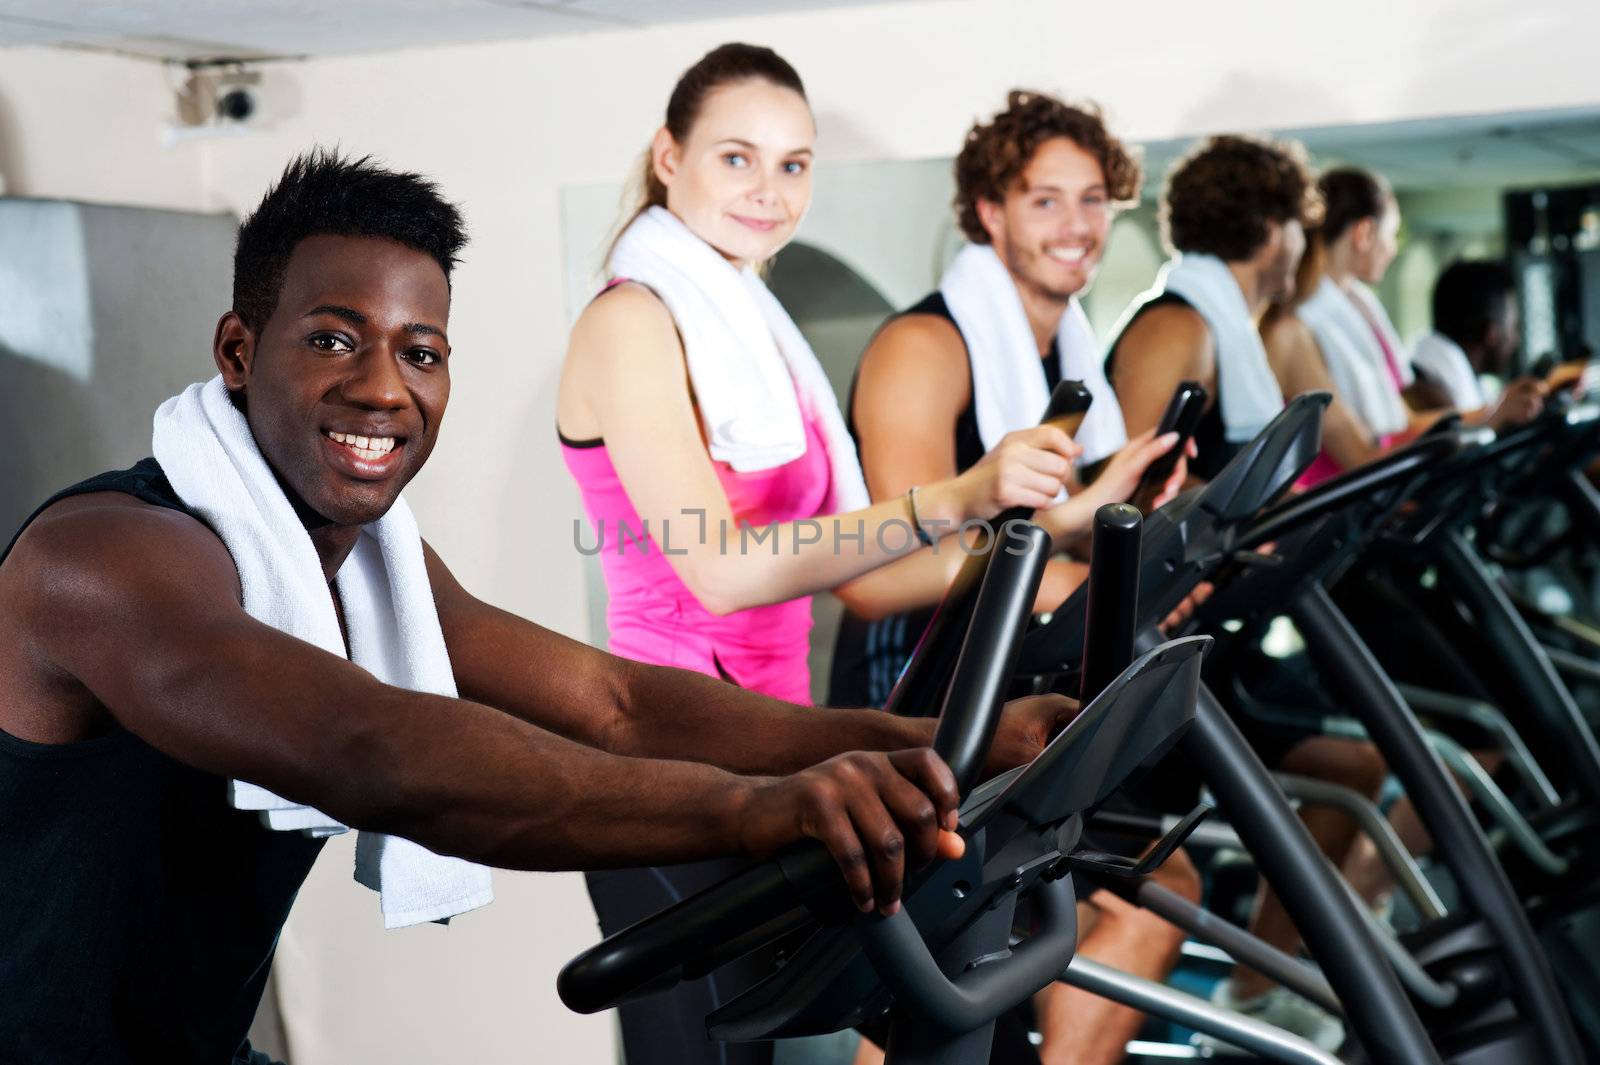 Energetic group working out together by stockyimages